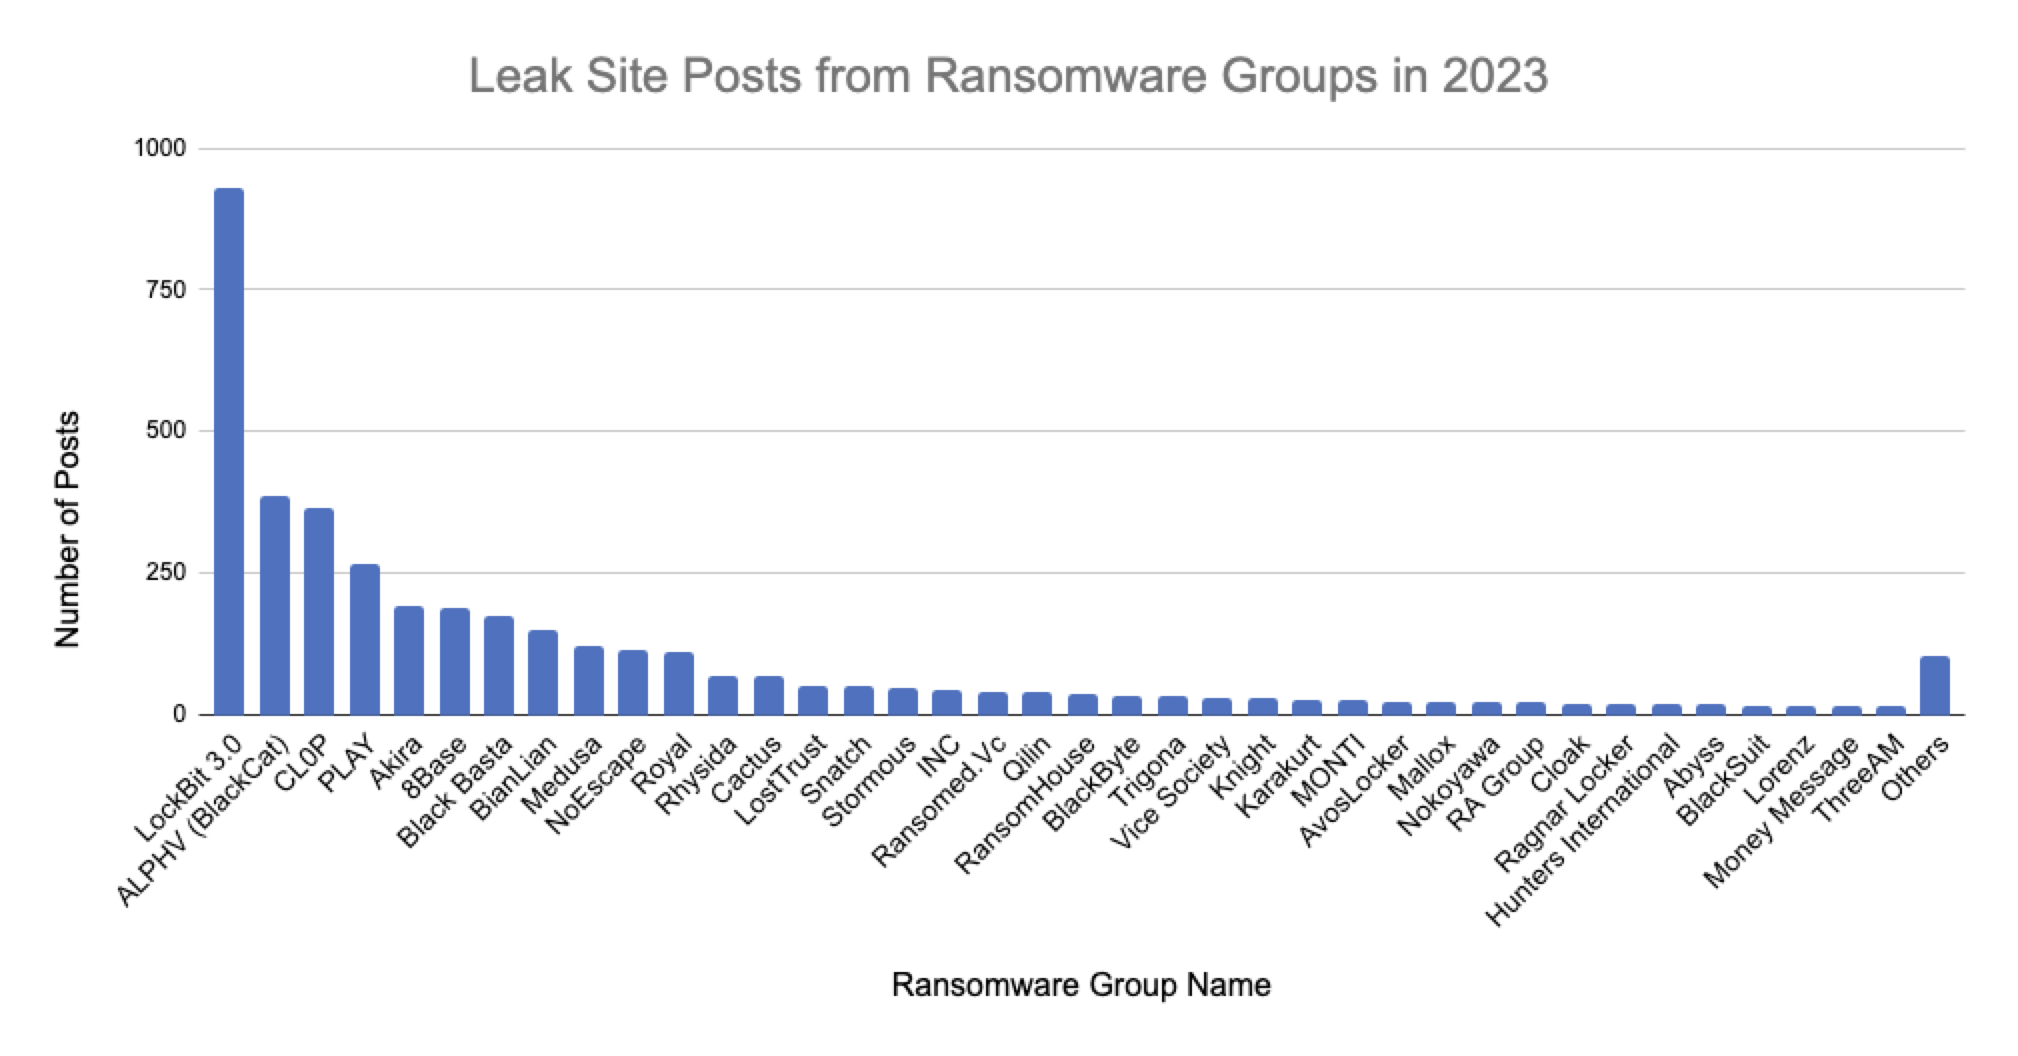 Image 7 is a column chart of post count of all 2023 ransomware leak site posts by group. The top three posts are from LockBit 3.0, ALPHV, Cl0p. LockBit is significantly higher than the rest. 